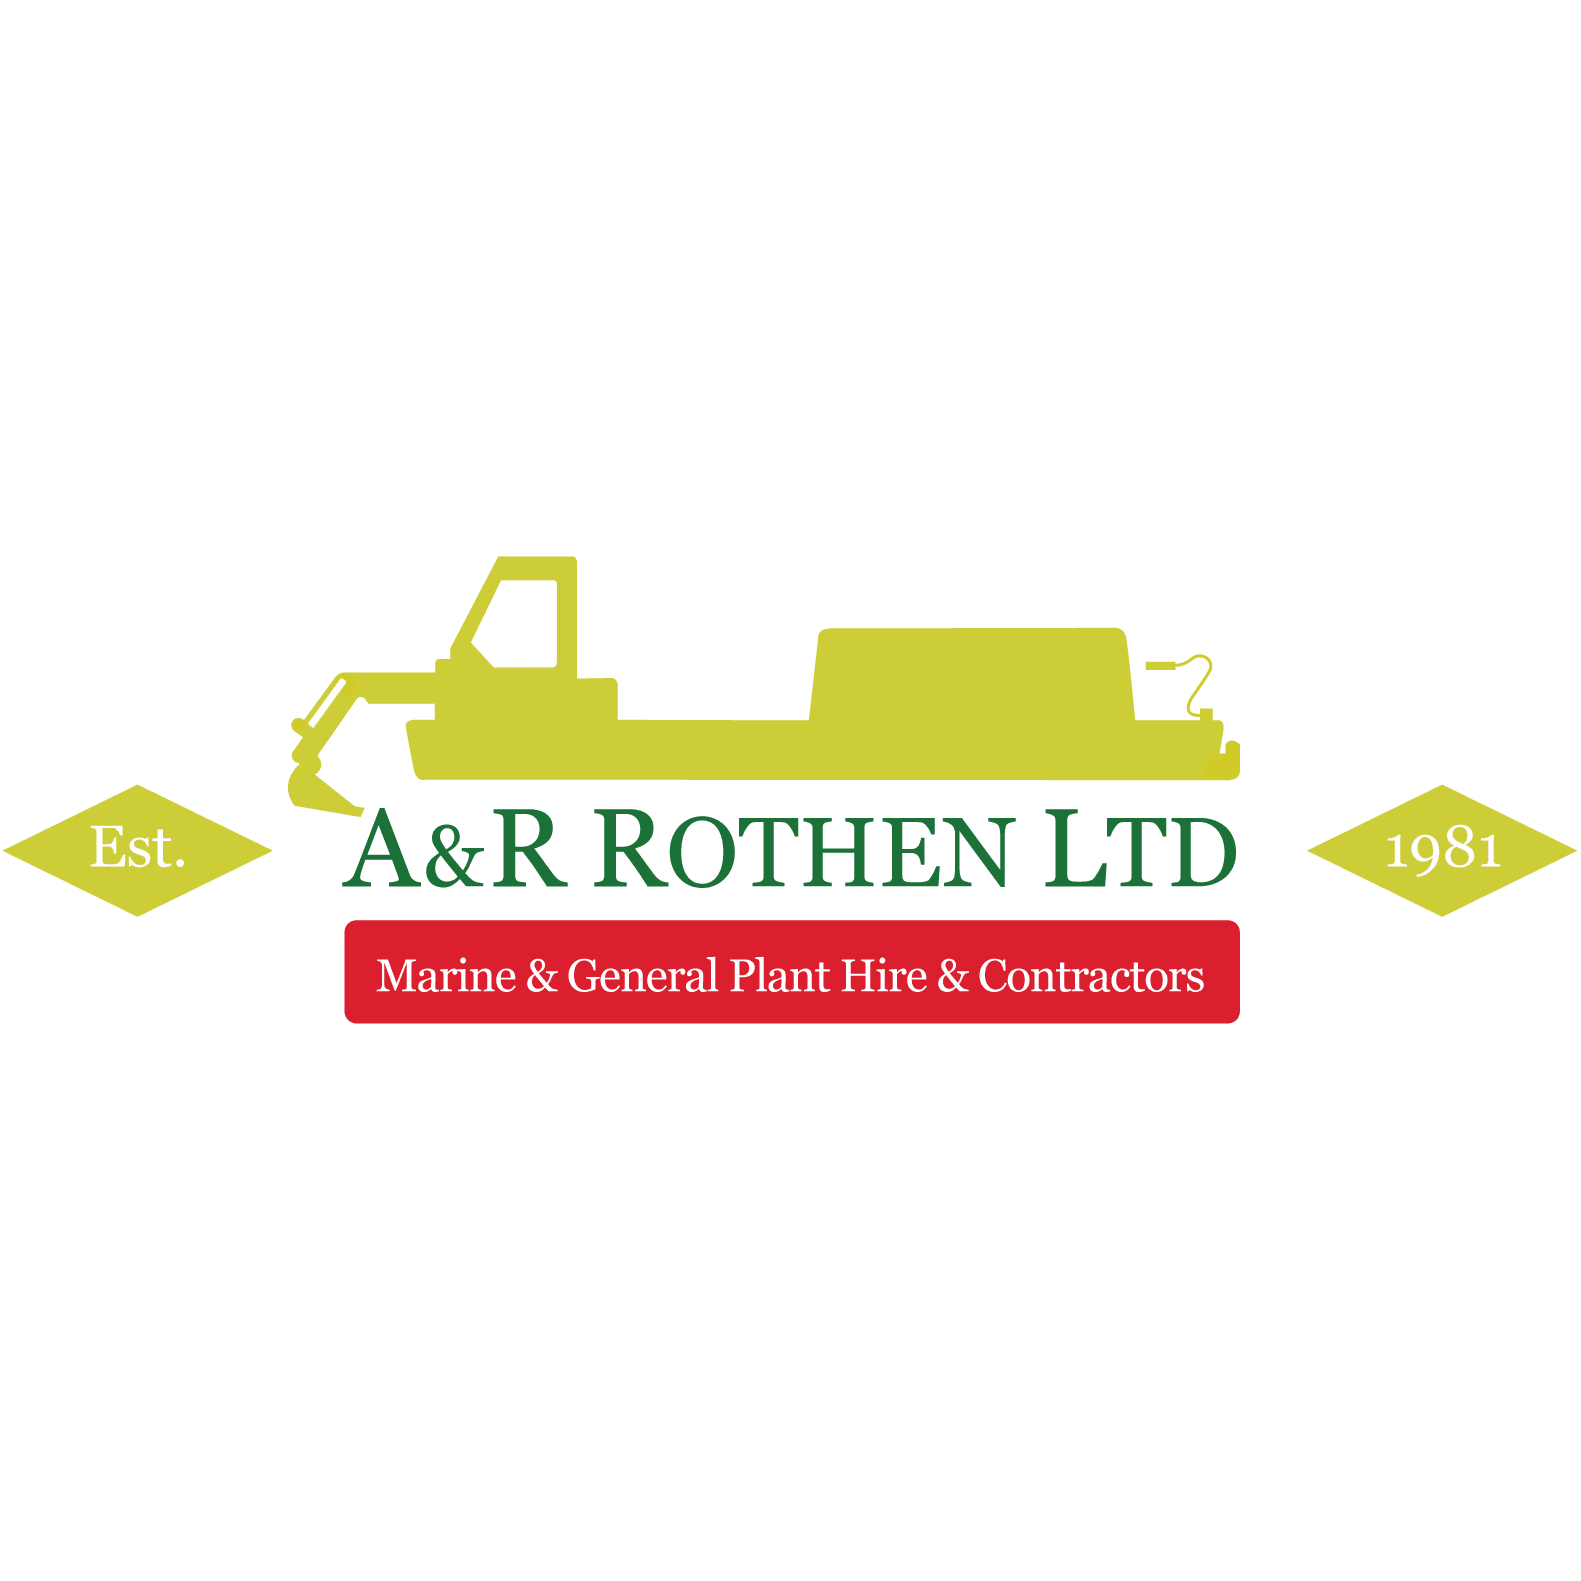 LOGO A & R Rothen Ltd - Rothen Workboats & Plant Hire Atherstone 01827 717884